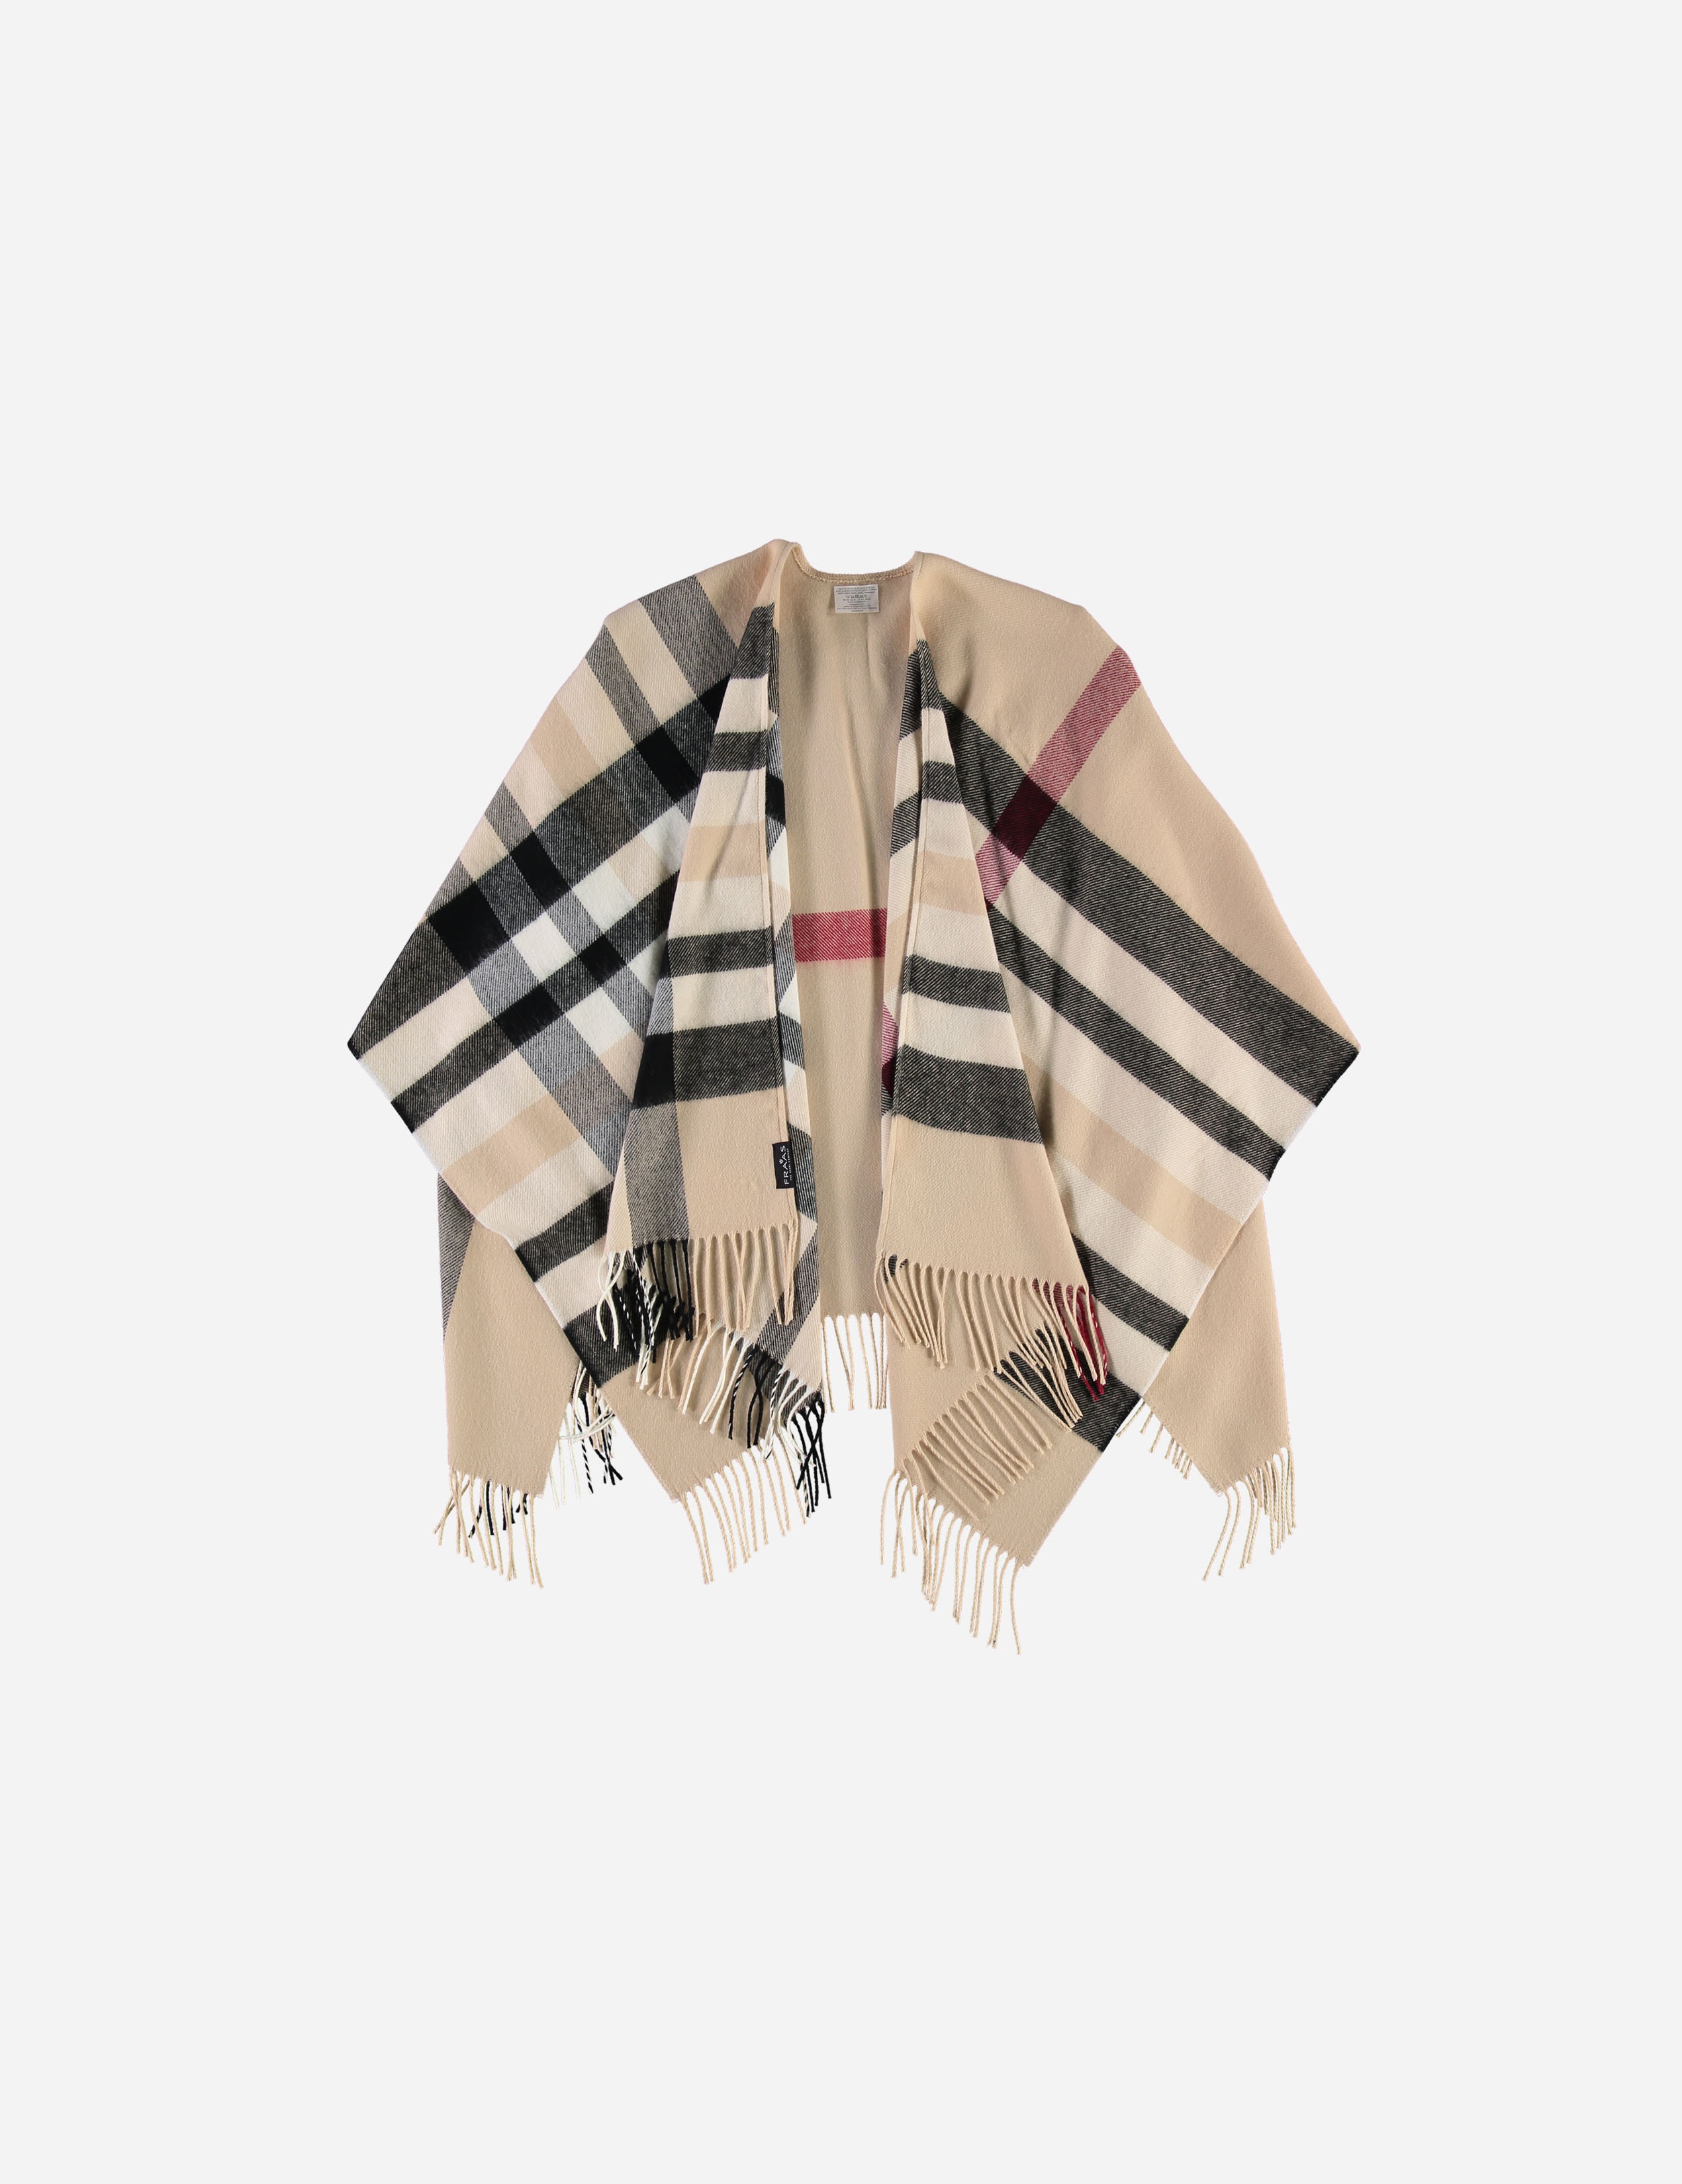 Off White Cape- $70.00
Polyester, Made in Germany
4035419157898